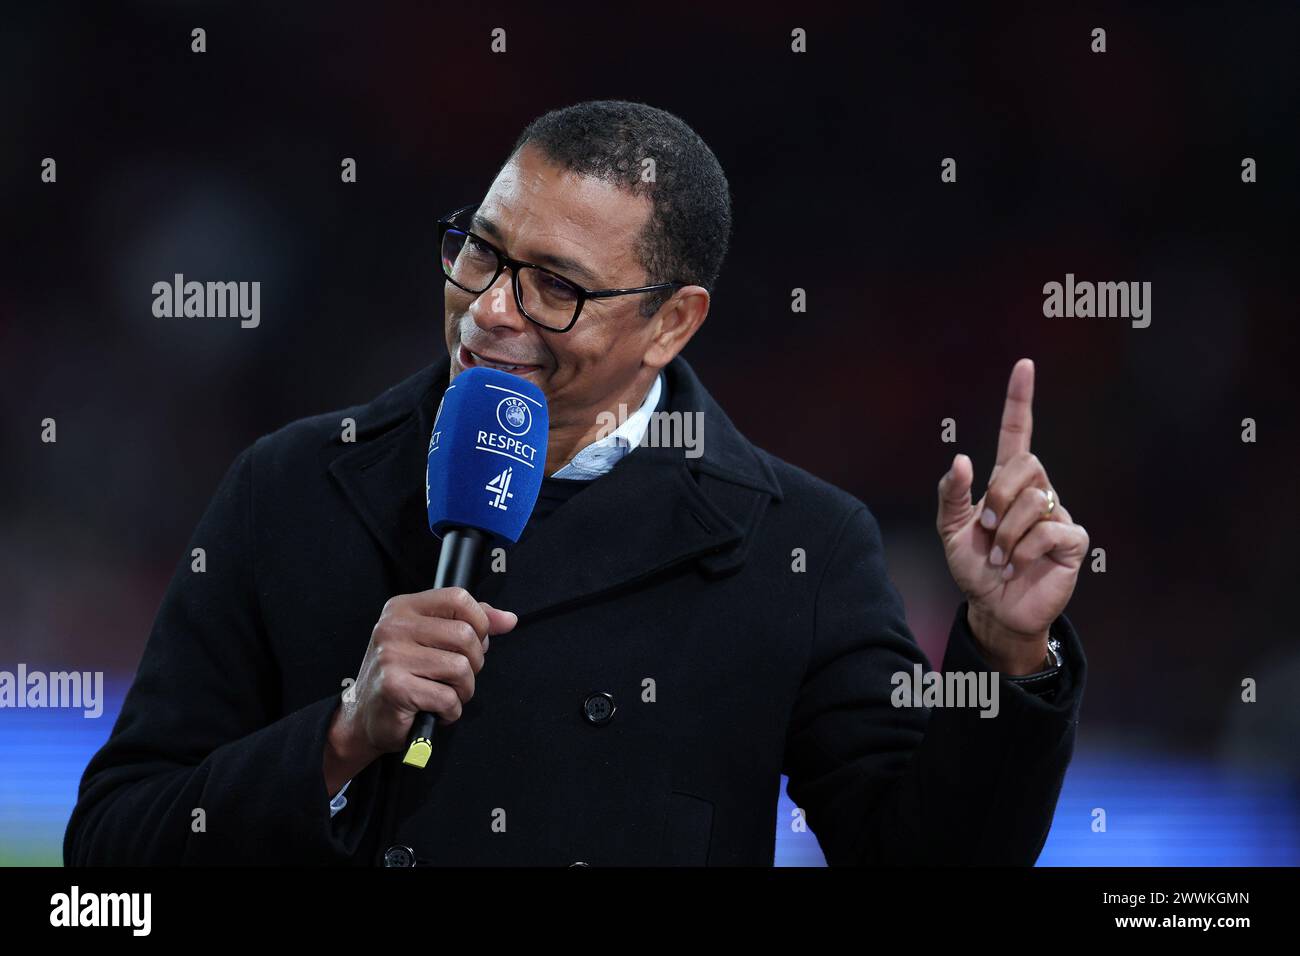 London, UK. 23rd Mar, 2024. Gilberto Silva is pictured while working on presenting team for Channel 4 television. England v Brazil, International football friendly match at Wembley Stadium in London on Saturday 23rd March 2024. Editorial use only. pic by Andrew Orchard/Andrew Orchard sports photography/Alamy Live News Credit: Andrew Orchard sports photography/Alamy Live News Stock Photo